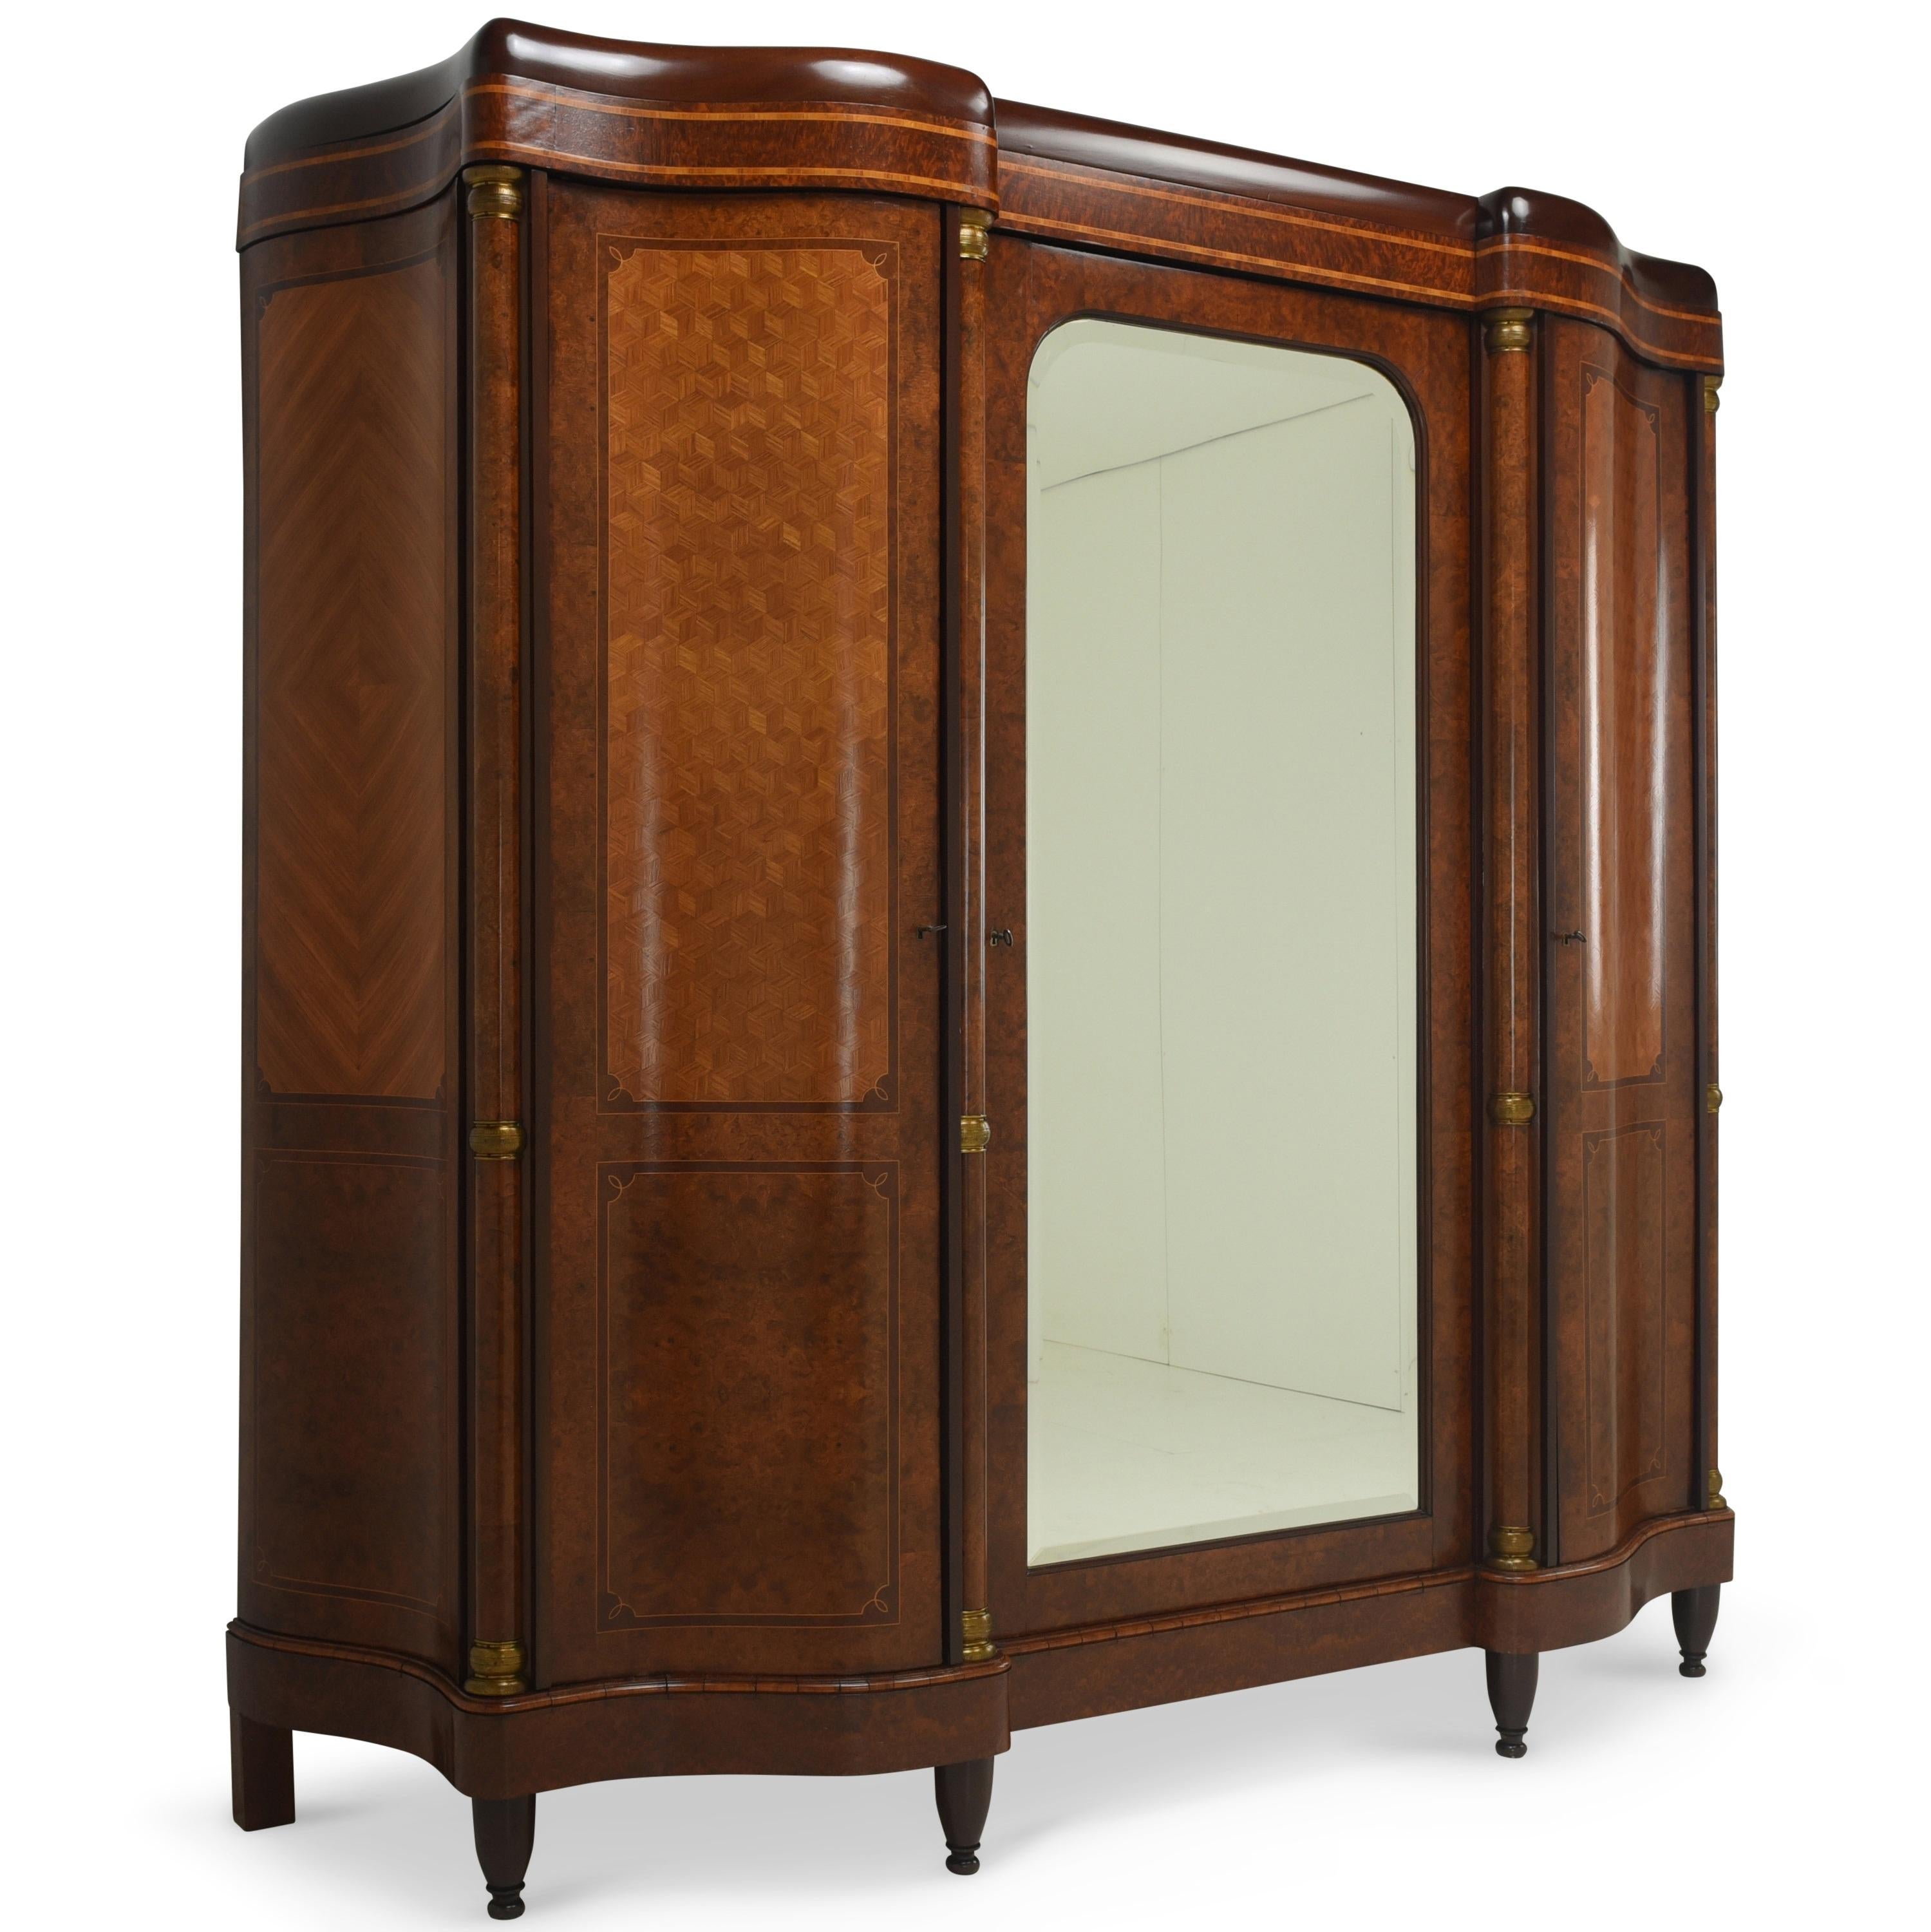 Large wardrobe restored Art Deco around 1925 root wood

Features:
Three-door model with two hanging rails and shelves
Very high quality processing
Even inside high-quality veneer
Original faceted mirror
Original fittings and metal